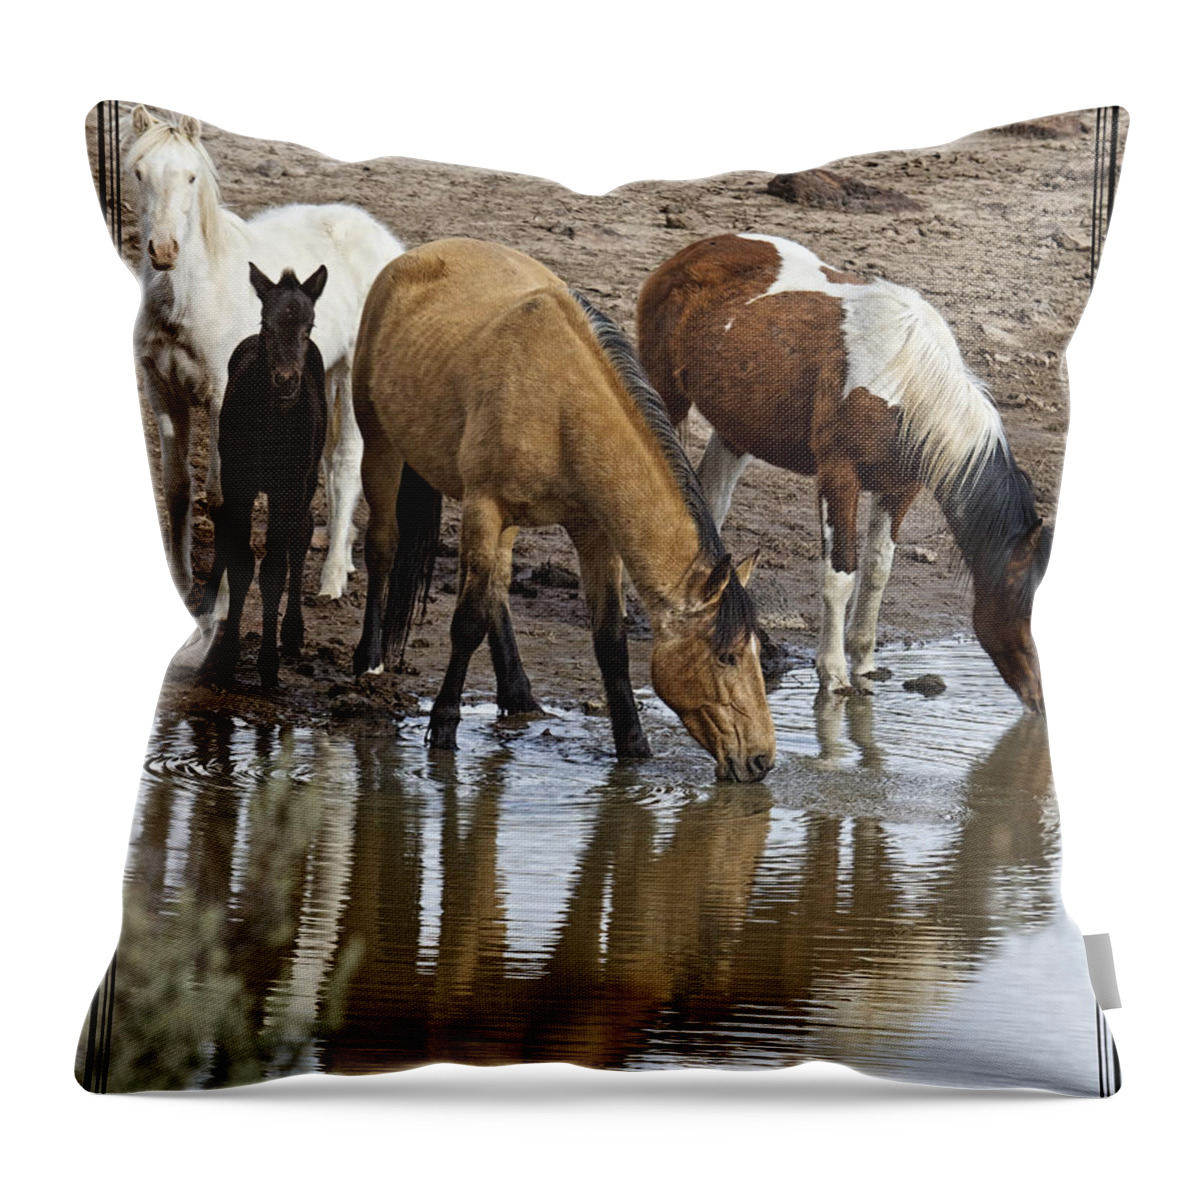 Another At The Watering Hole Throw Pillow featuring the photograph Another At The Watering Hole by Wes and Dotty Weber